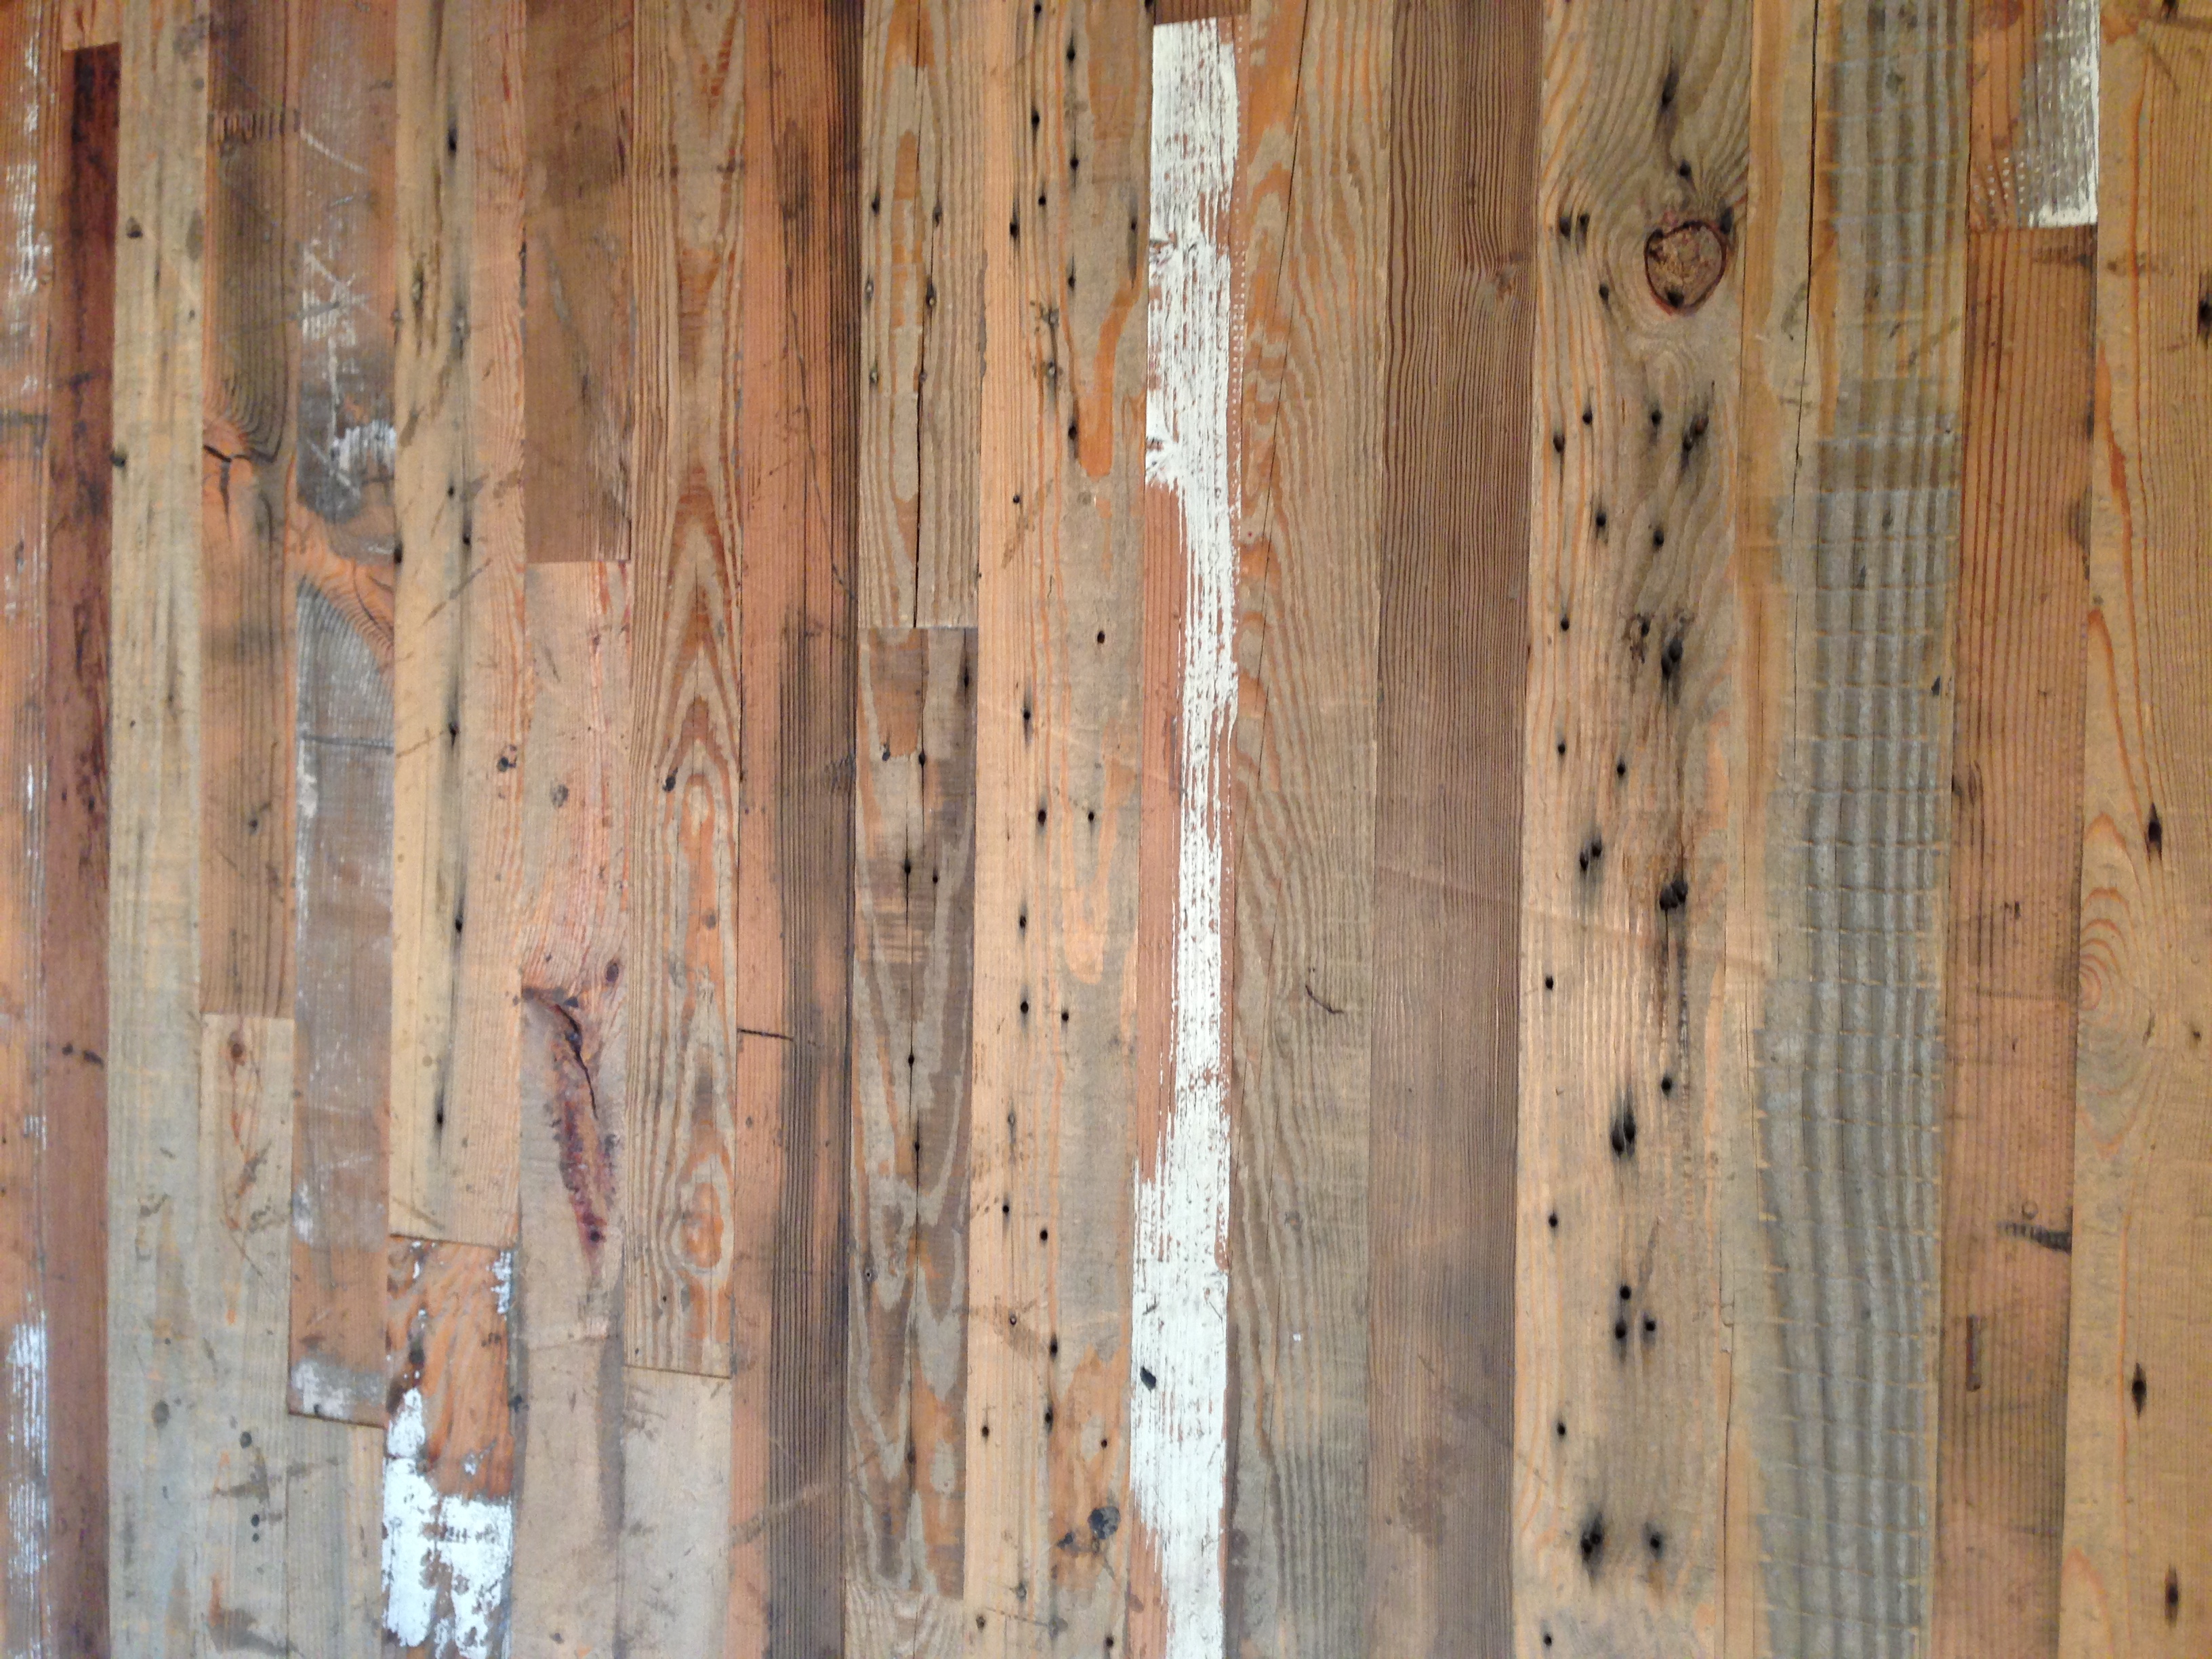 Download wallpaper that looks like distressed wood - Distressed ...